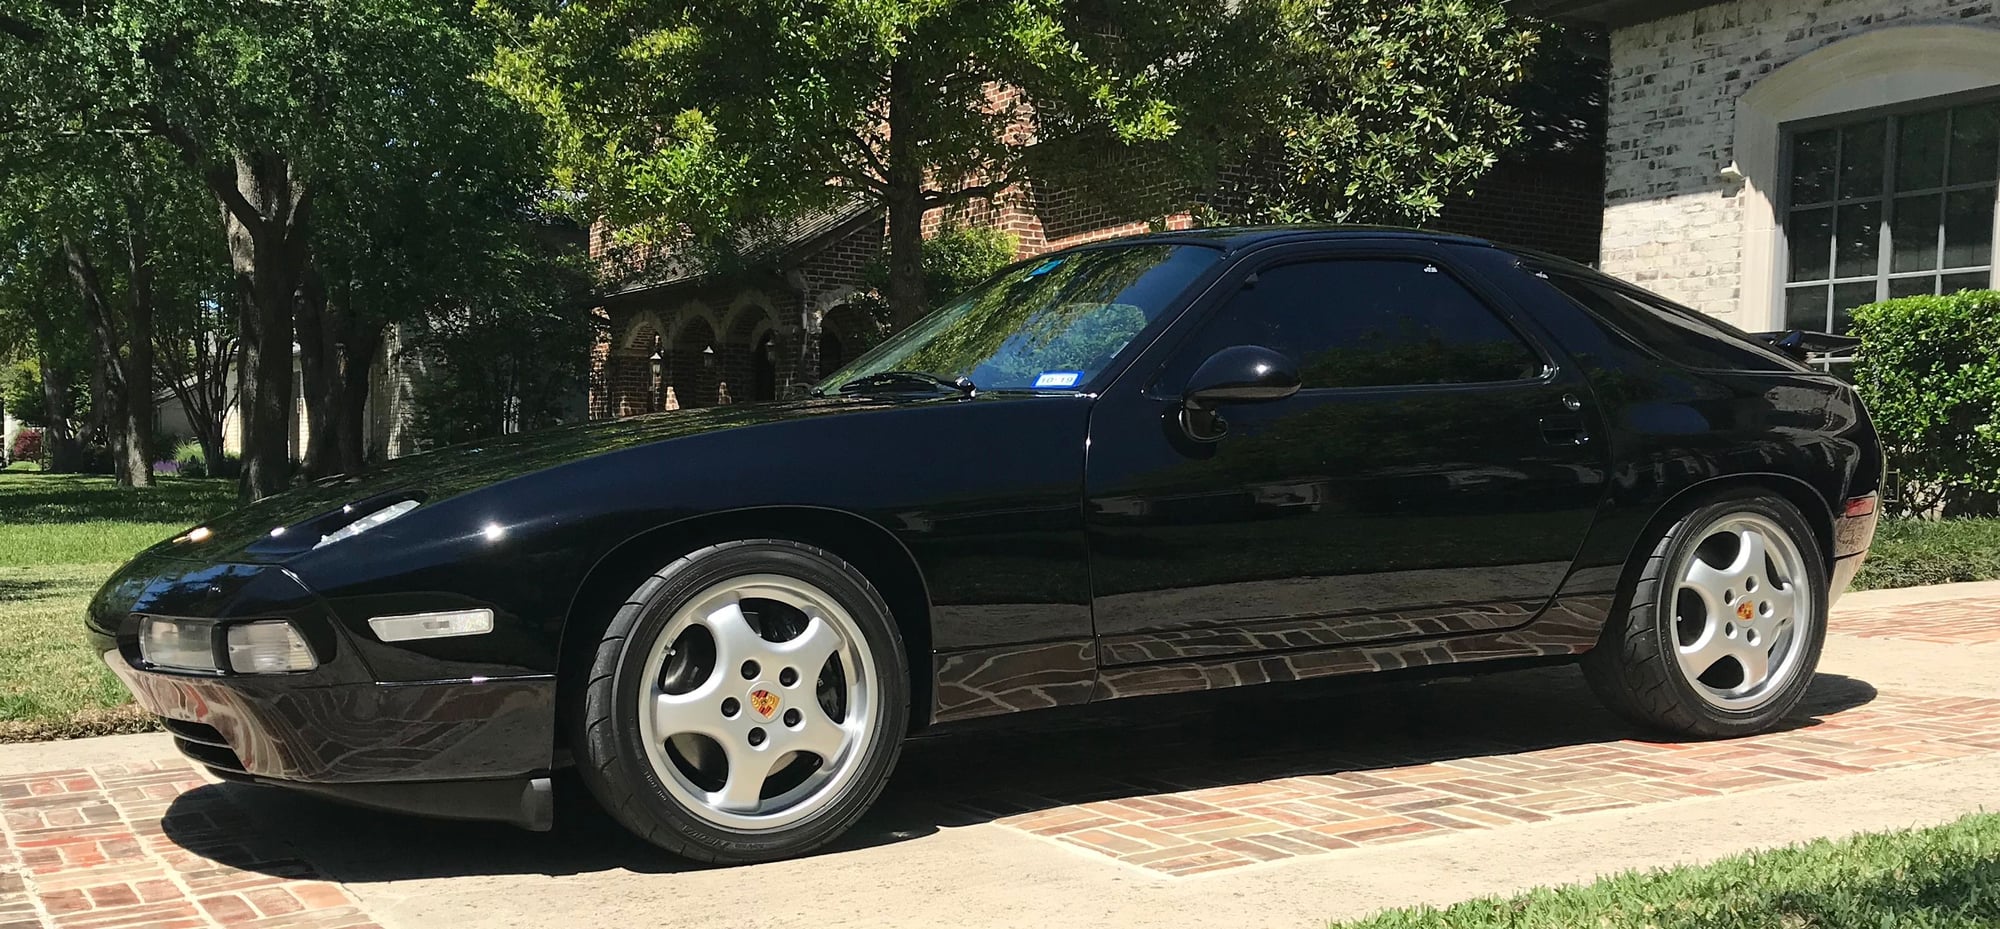 1994 Porsche 928 - 1994 928 GTS - Used - VIN WP0AA292XRS820072 - 56,300 Miles - 8 cyl - 2WD - Automatic - Coupe - Black - Dallas, TX 75230, United States